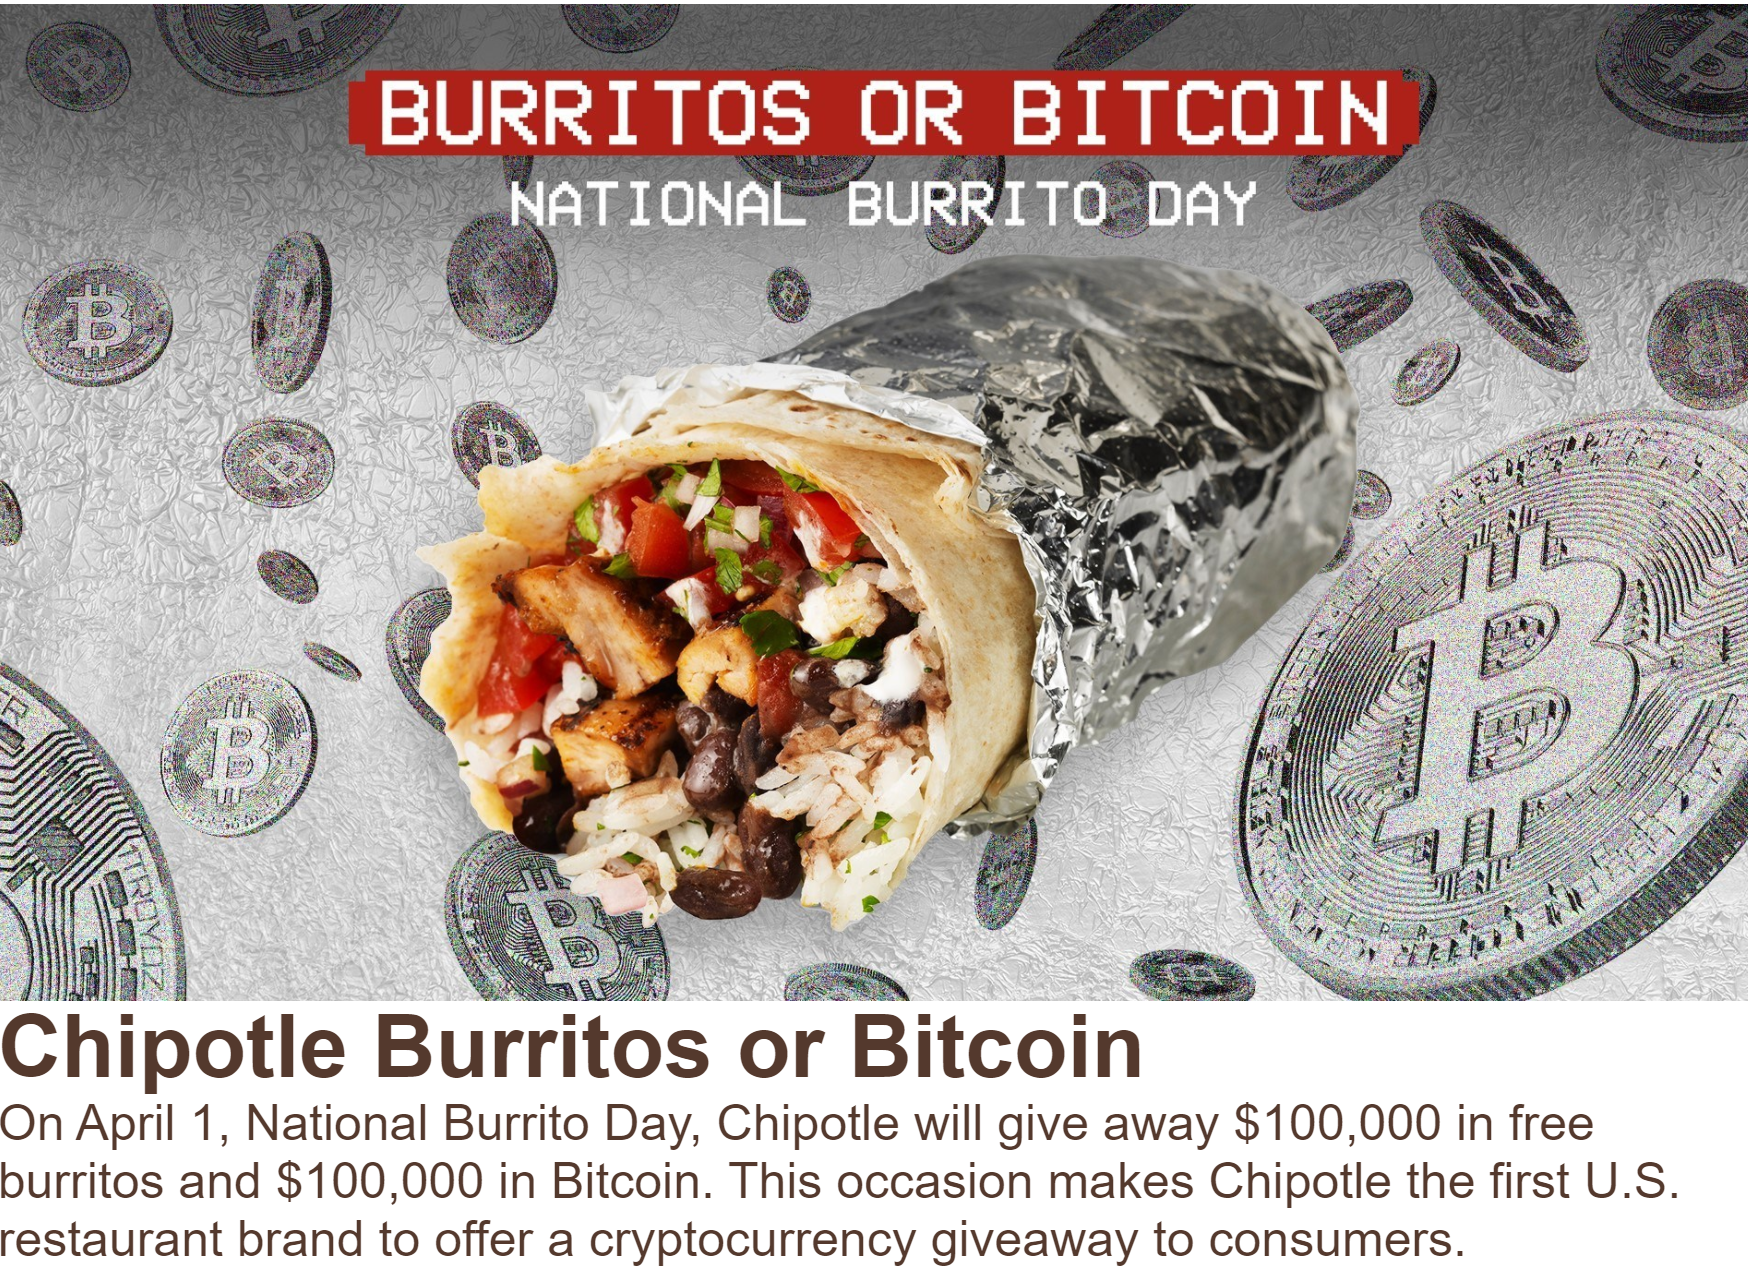 Free Bitcoin: Major US Fast Food Chain Chipotle Giving Away $100K in BTC to Celebrate National Burrito Day